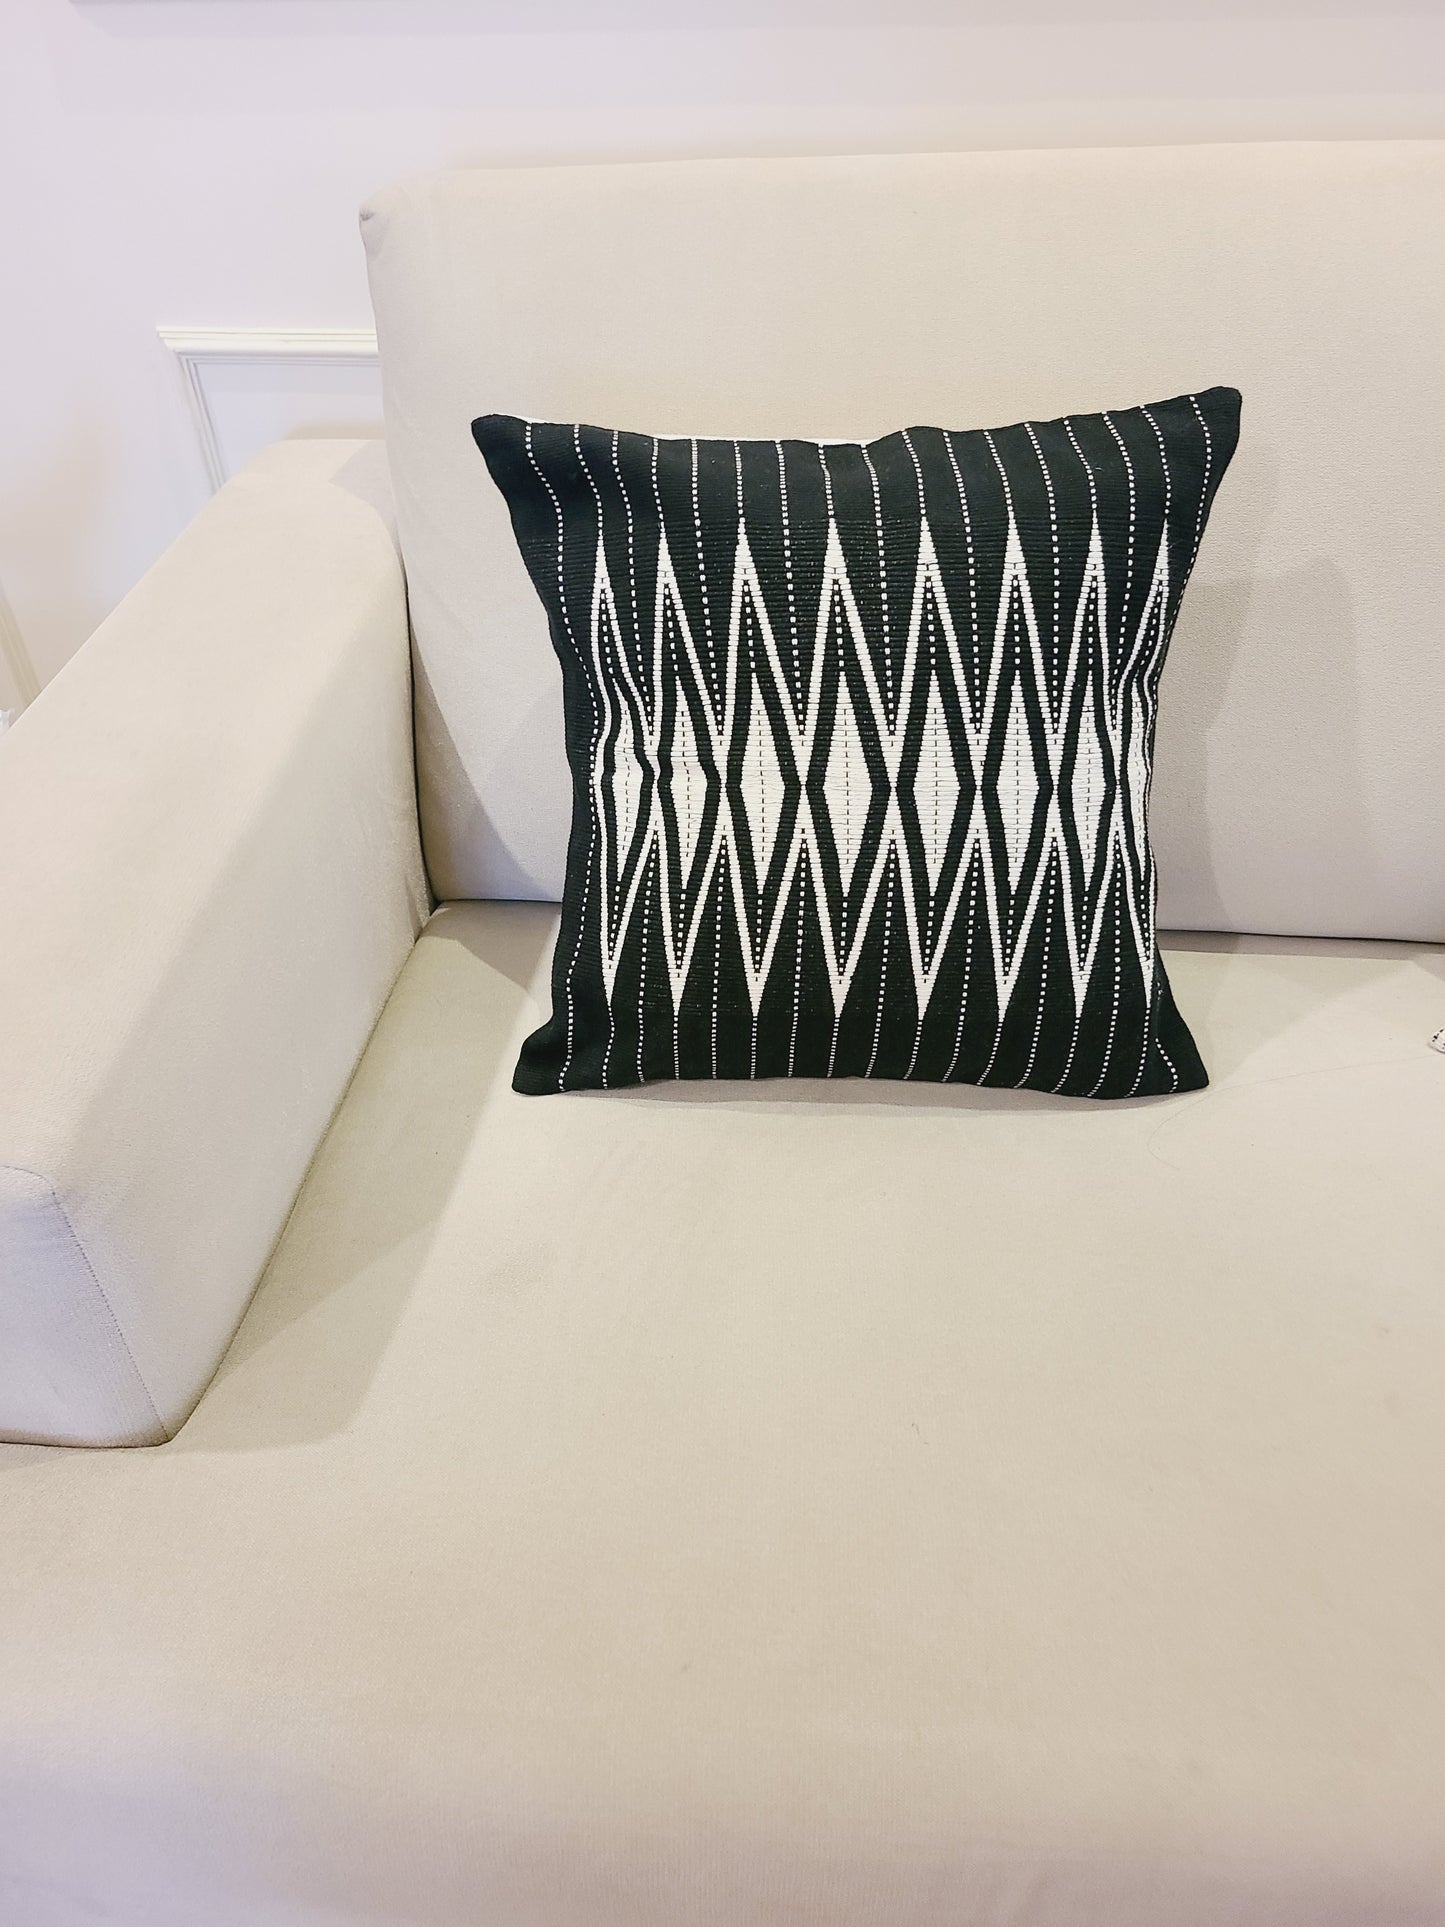 Handwoven Cushion covers- from Nagaland